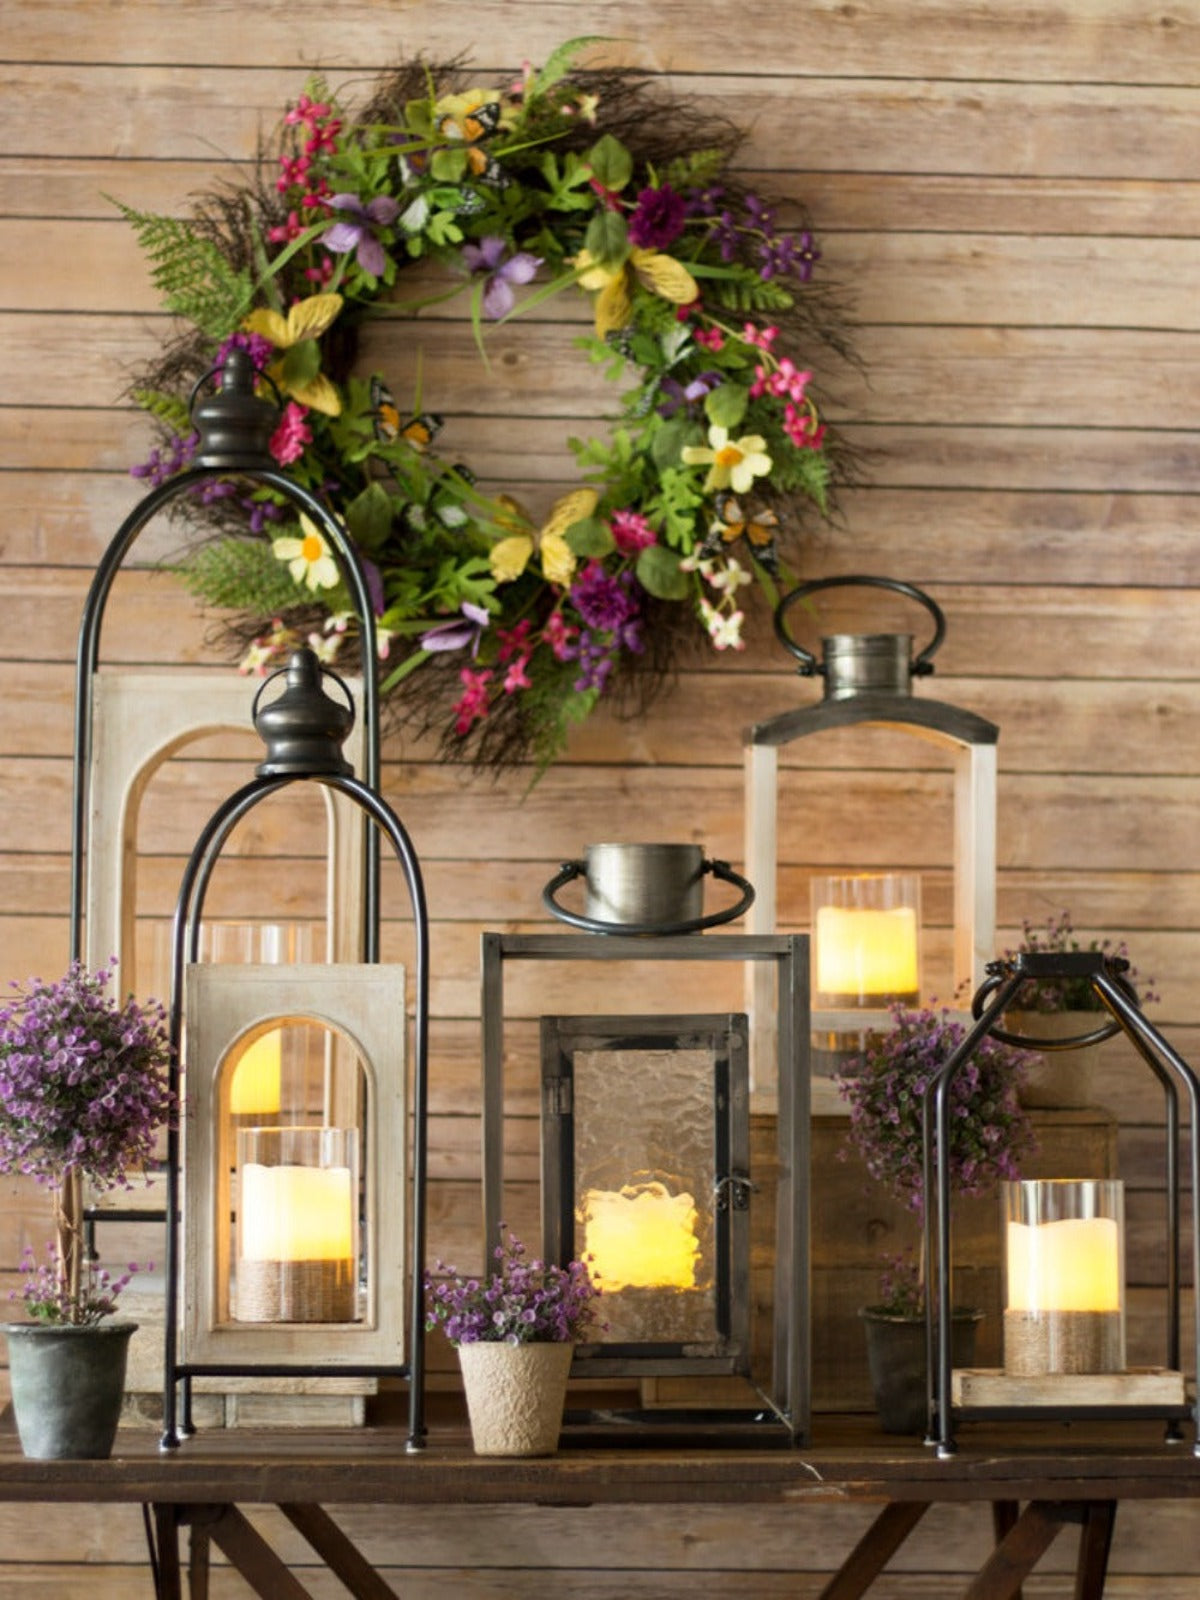 The modern country style of the Cambridge Lantern offers an impressive way to give your space a warm glow. A wooden case holds a glass hurricane within an open metal frame. 